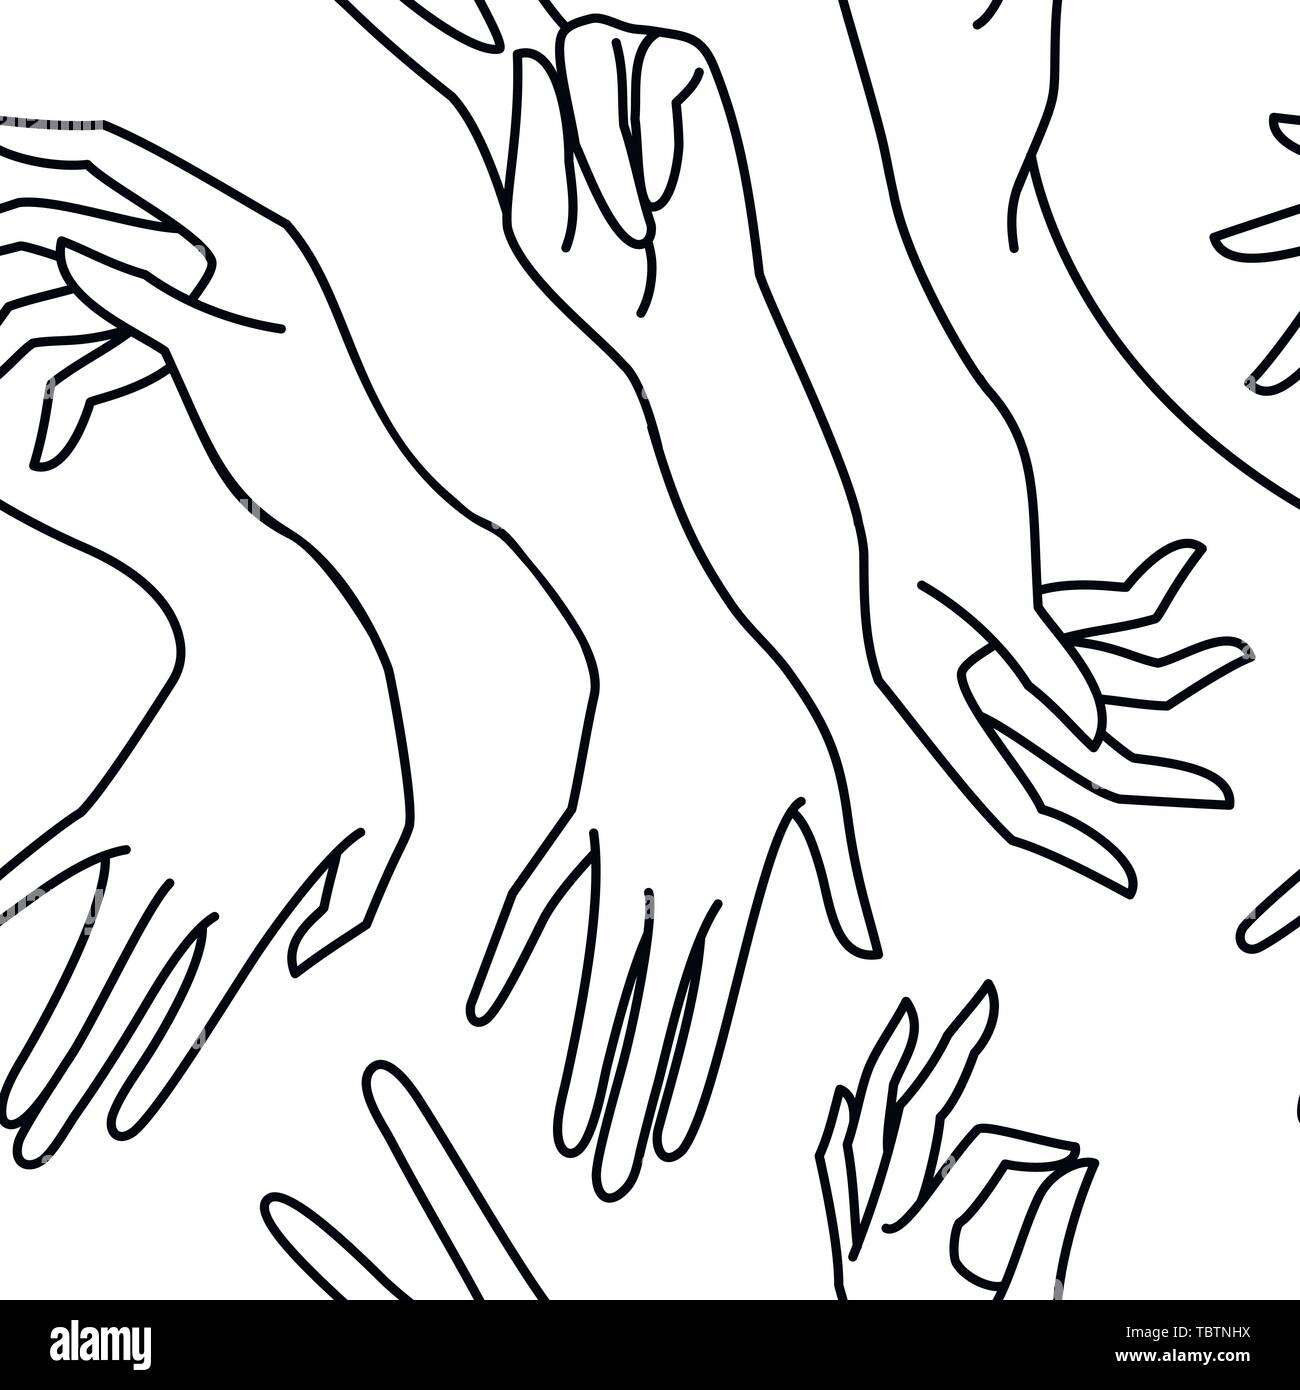 Woman S Hand Line Black And White Seamless Pattern Vector Endless Background Of Female Hands Of Different